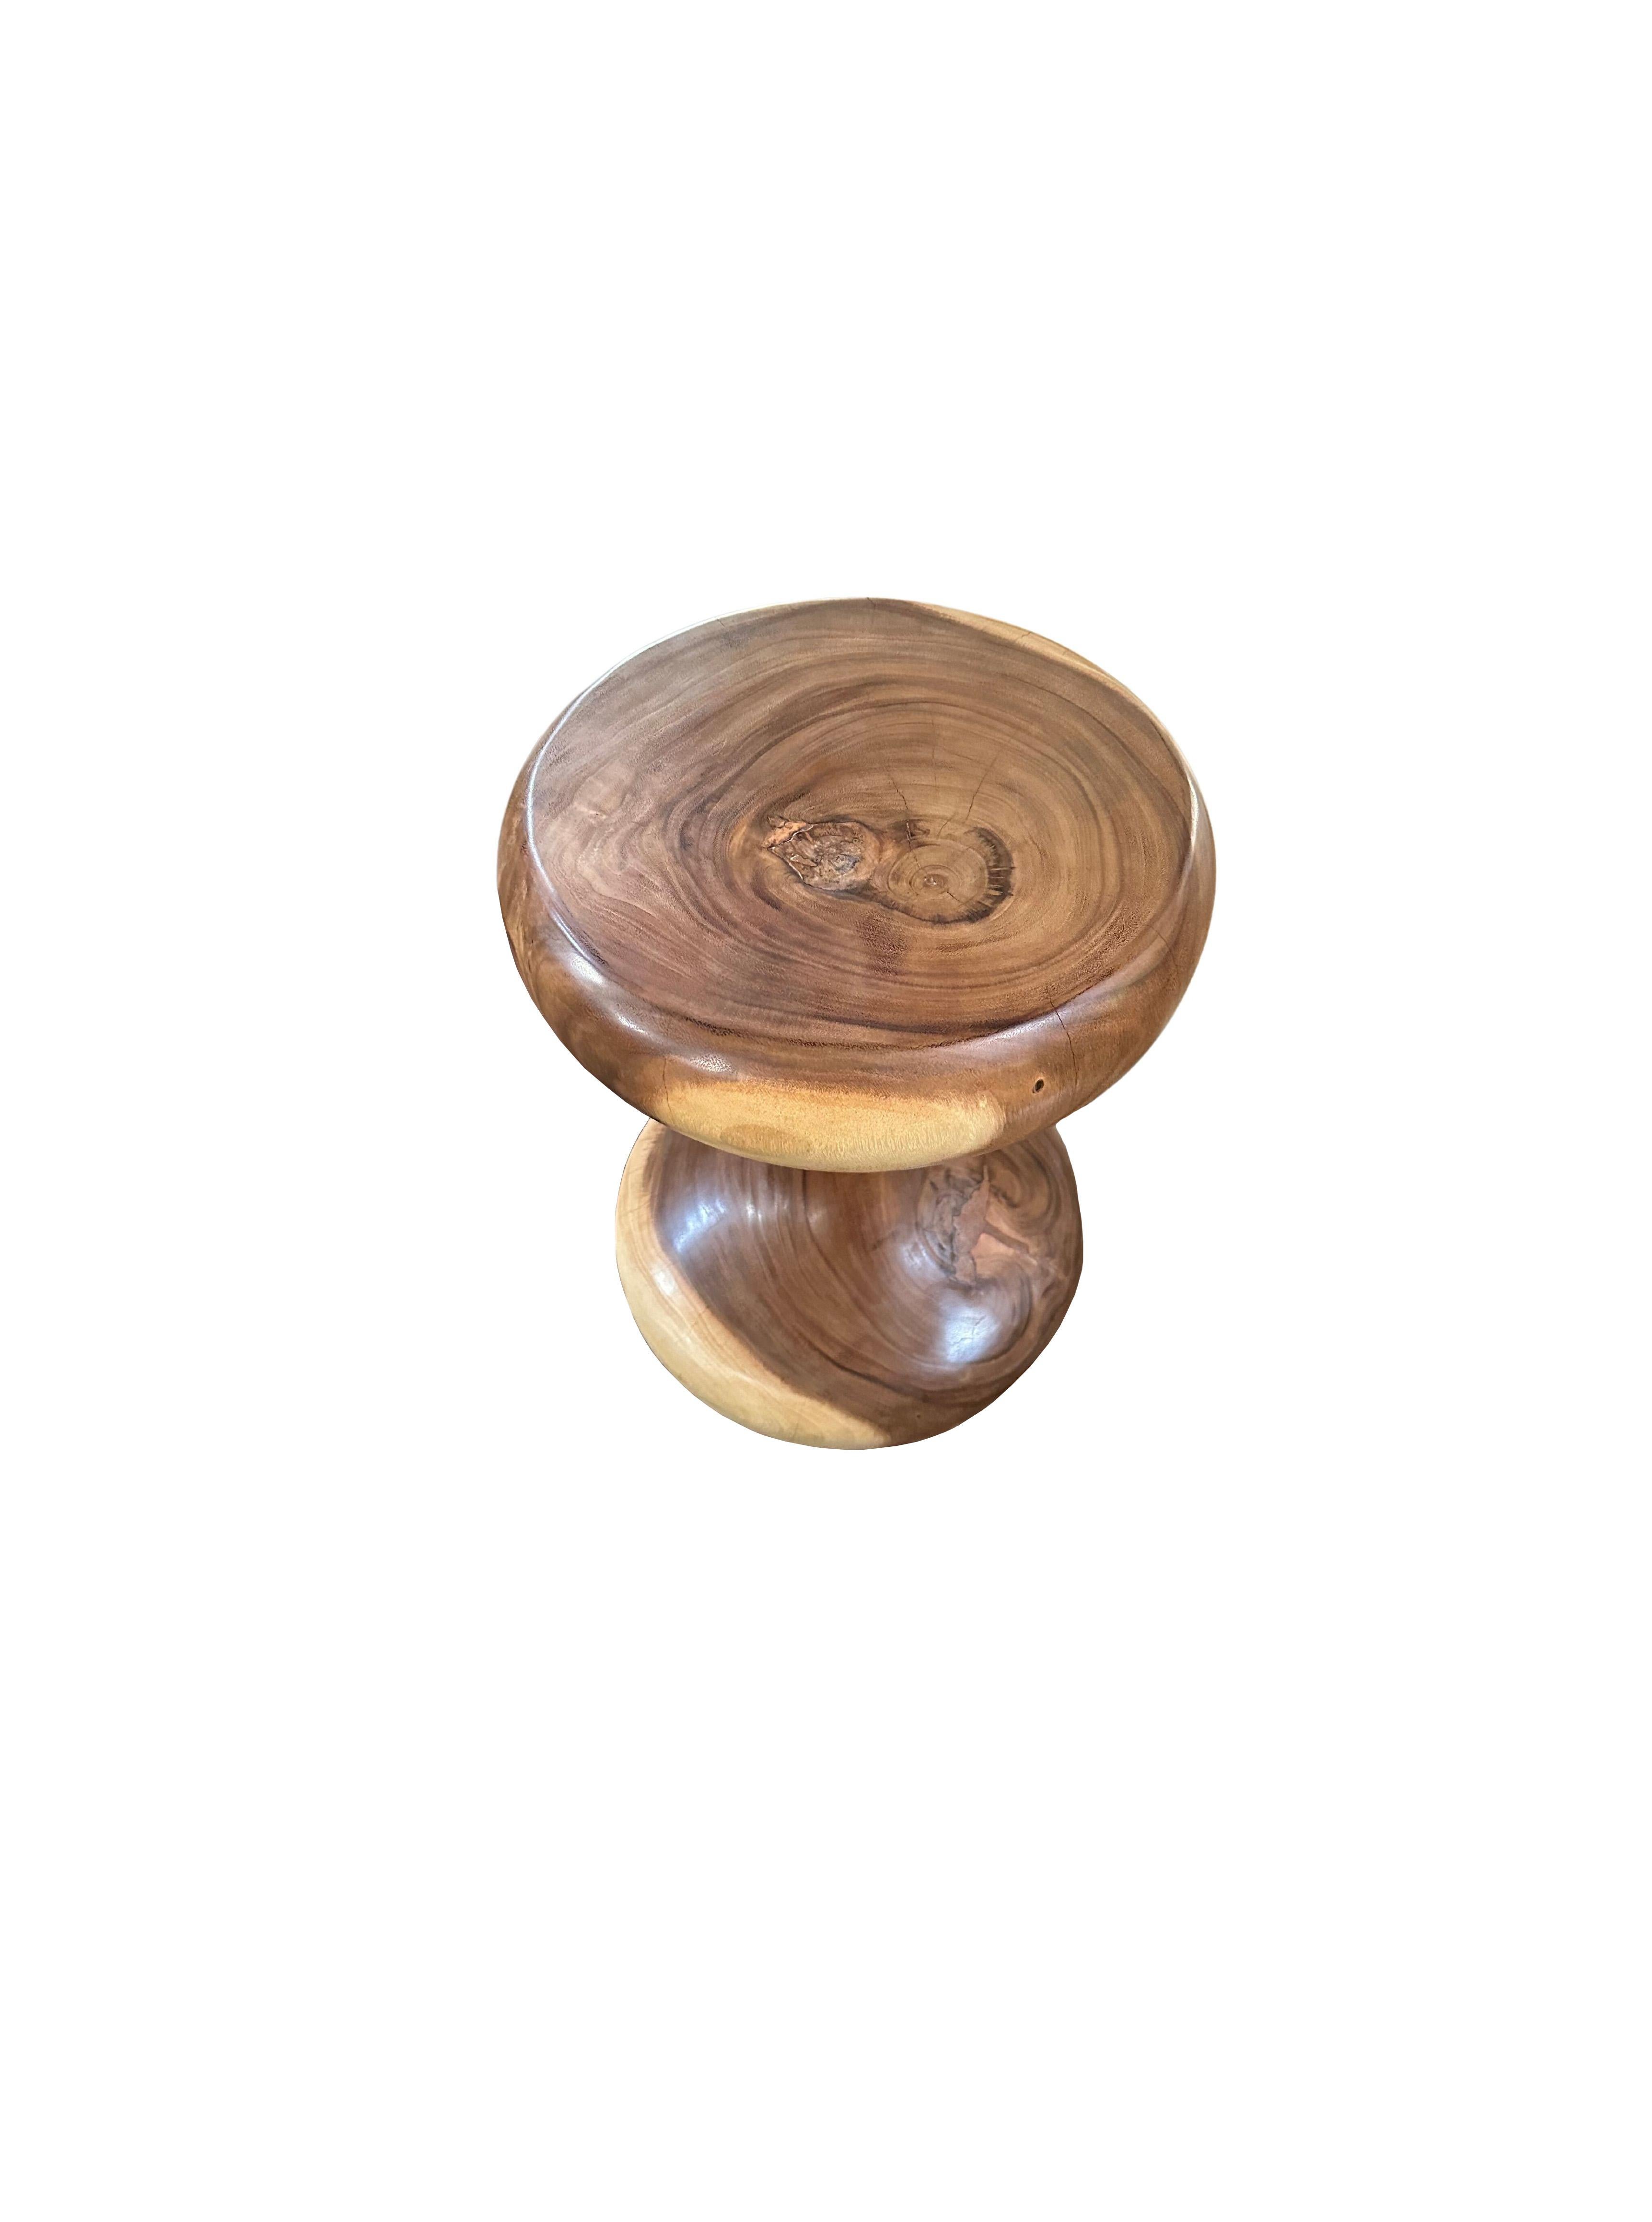 Hand-Crafted Sculptural Suar Wood Side Table, with Stunning Wood Textures, Modern Organic For Sale